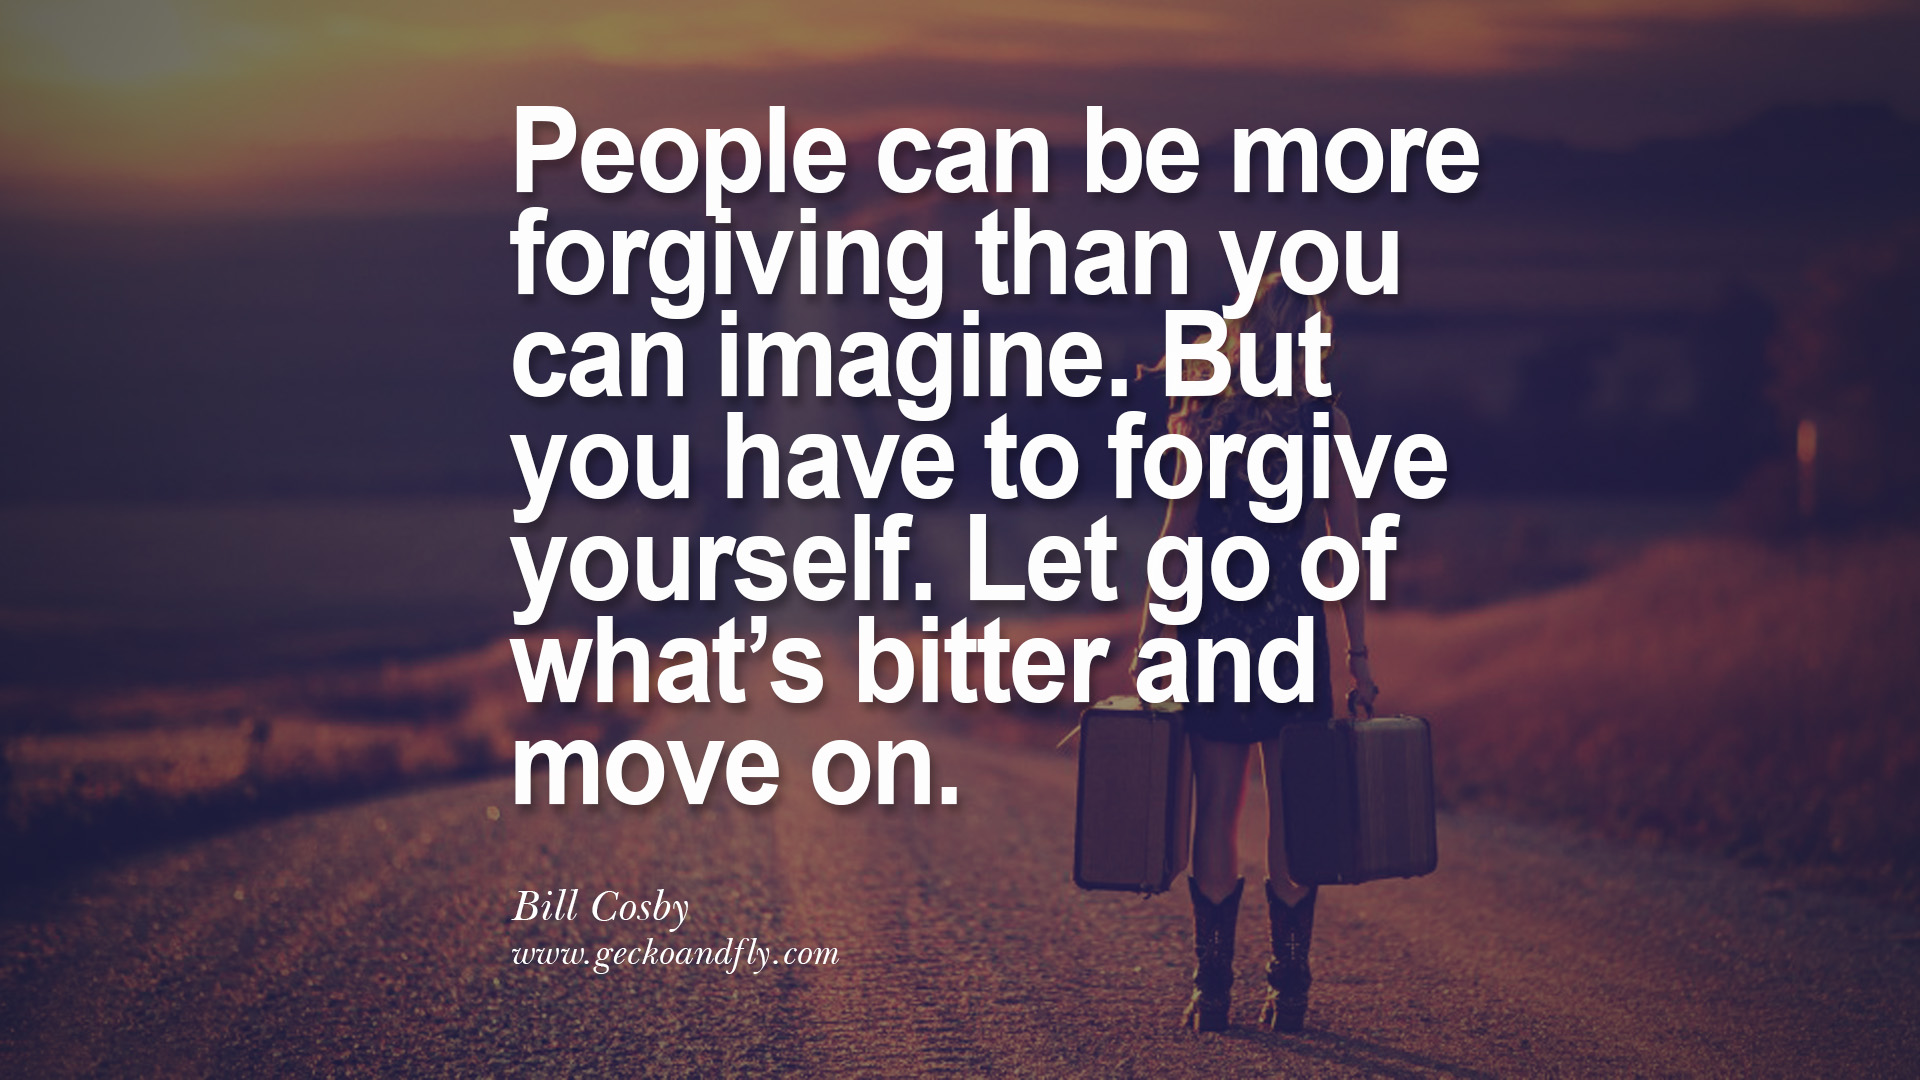 Quotes About Moving On Letting Go And From A Relationship.